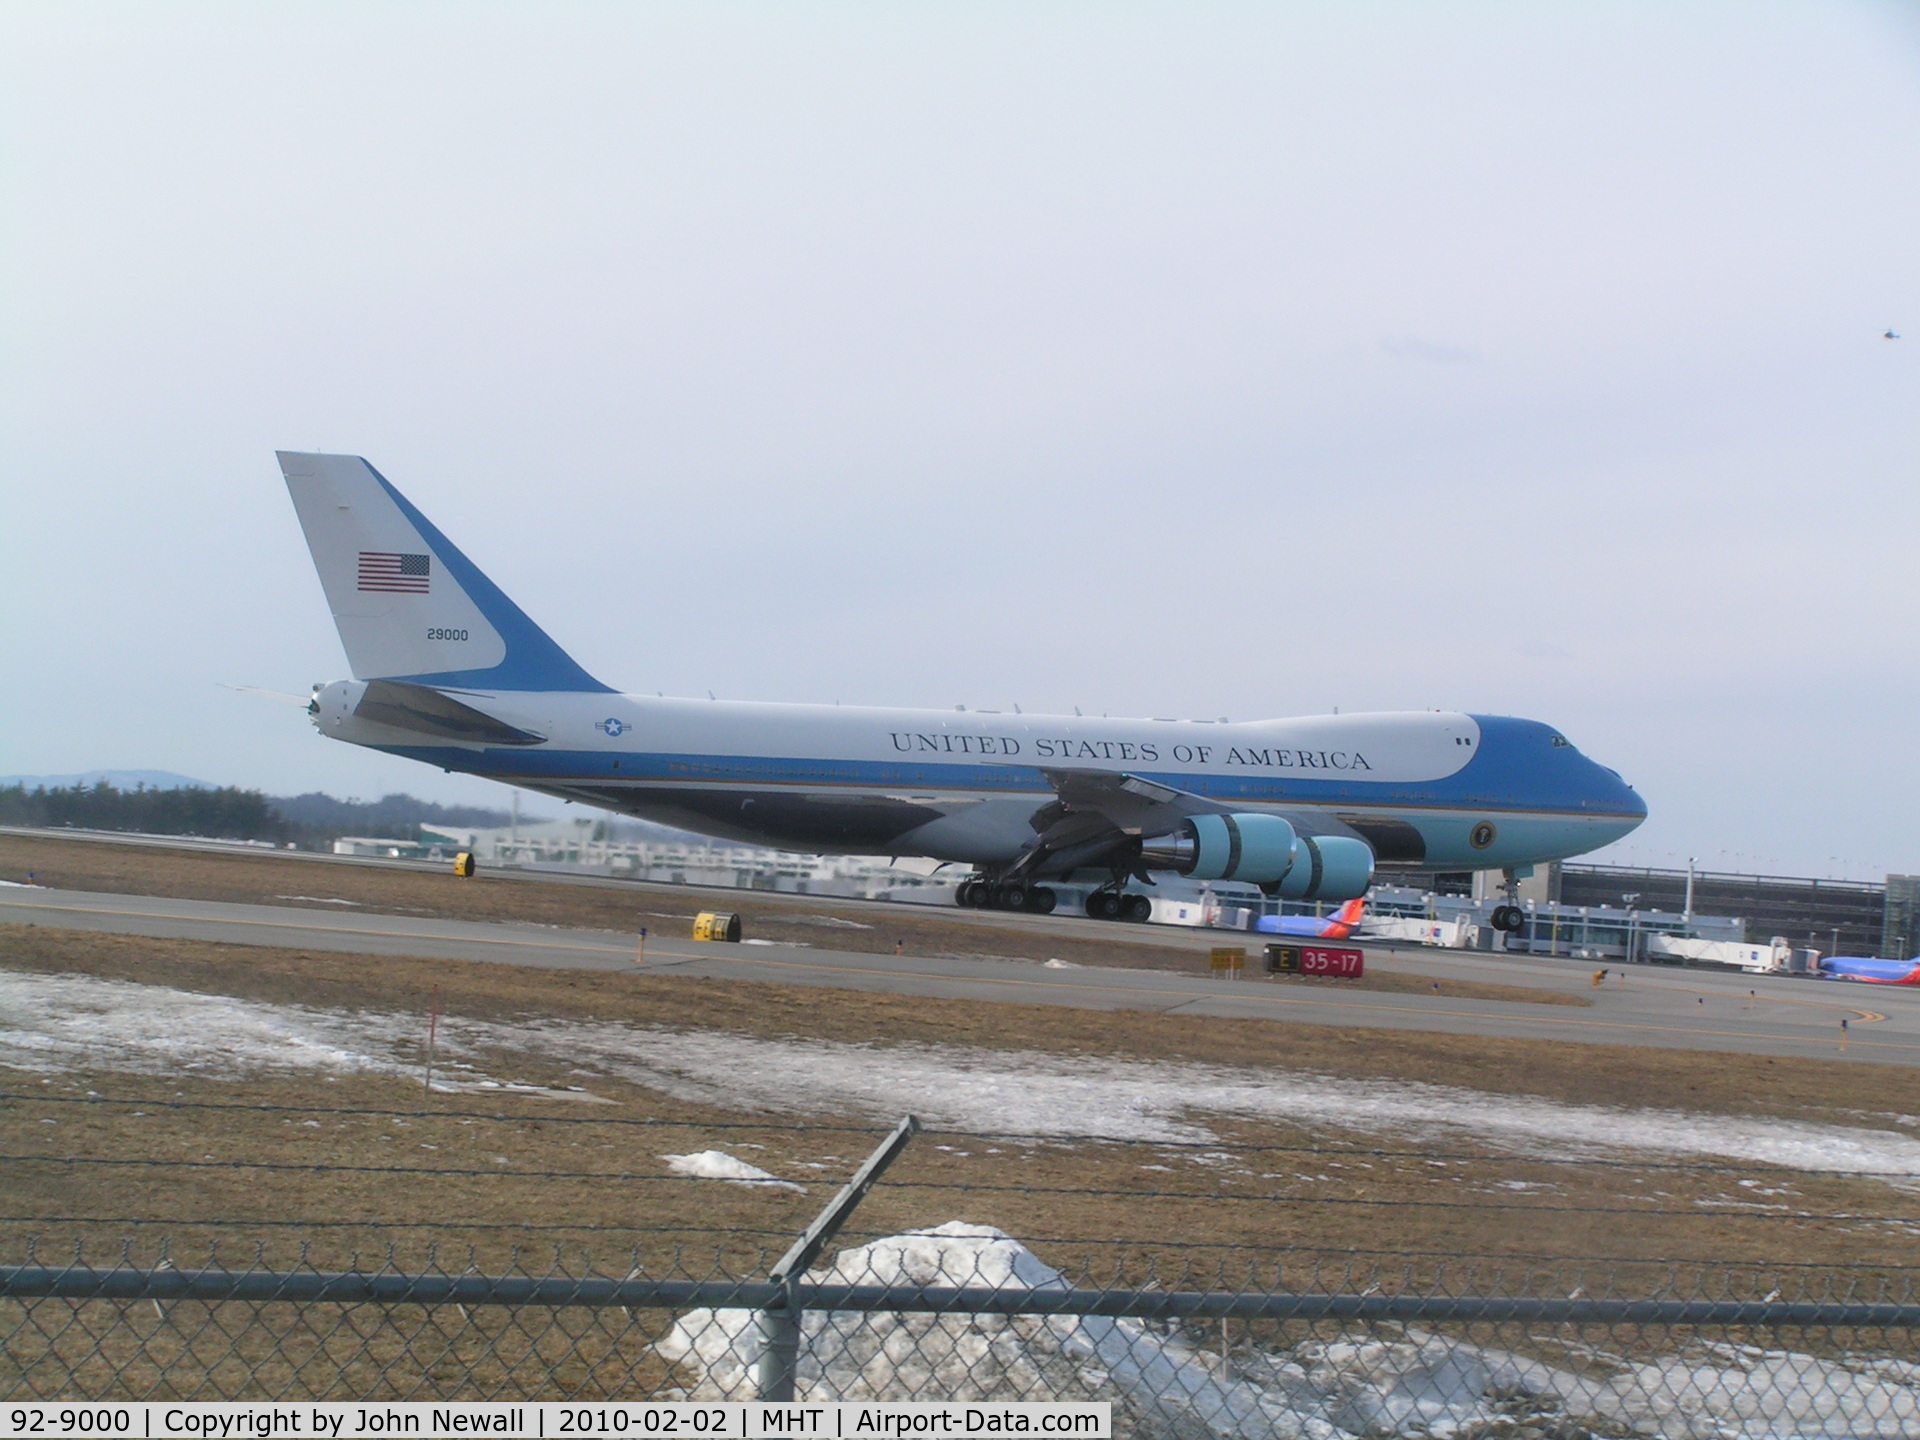 92-9000, 1987 Boeing VC-25A (747-2G4B) C/N 23825, Air Force One landing on runway 35 on a cold winter afternoon